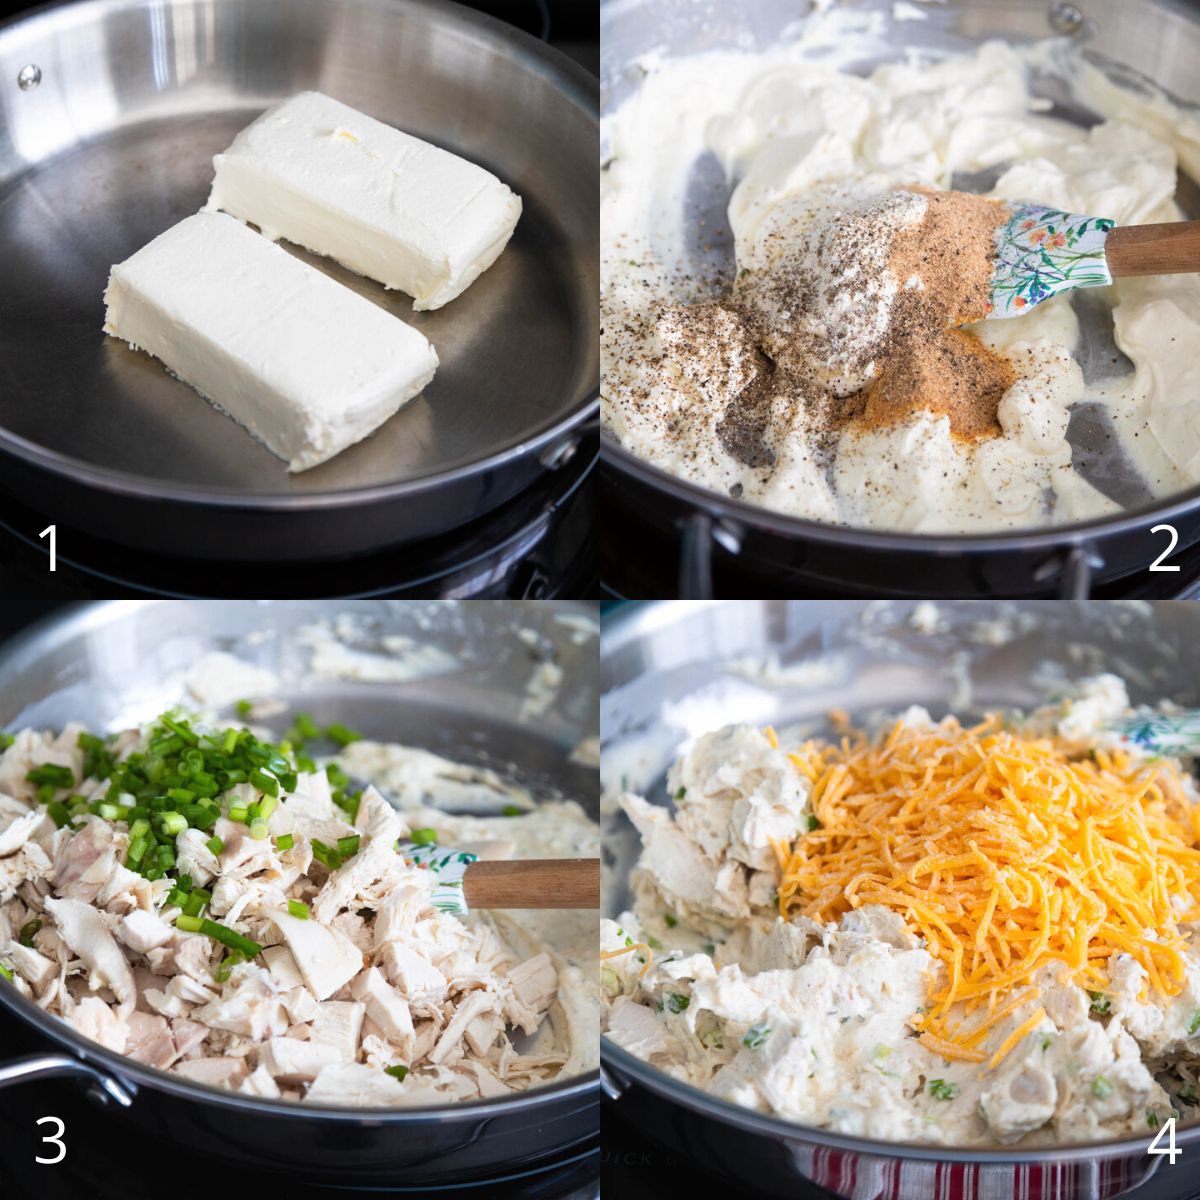 The step by step photos show how to make the crack chicken filling for the sliders.